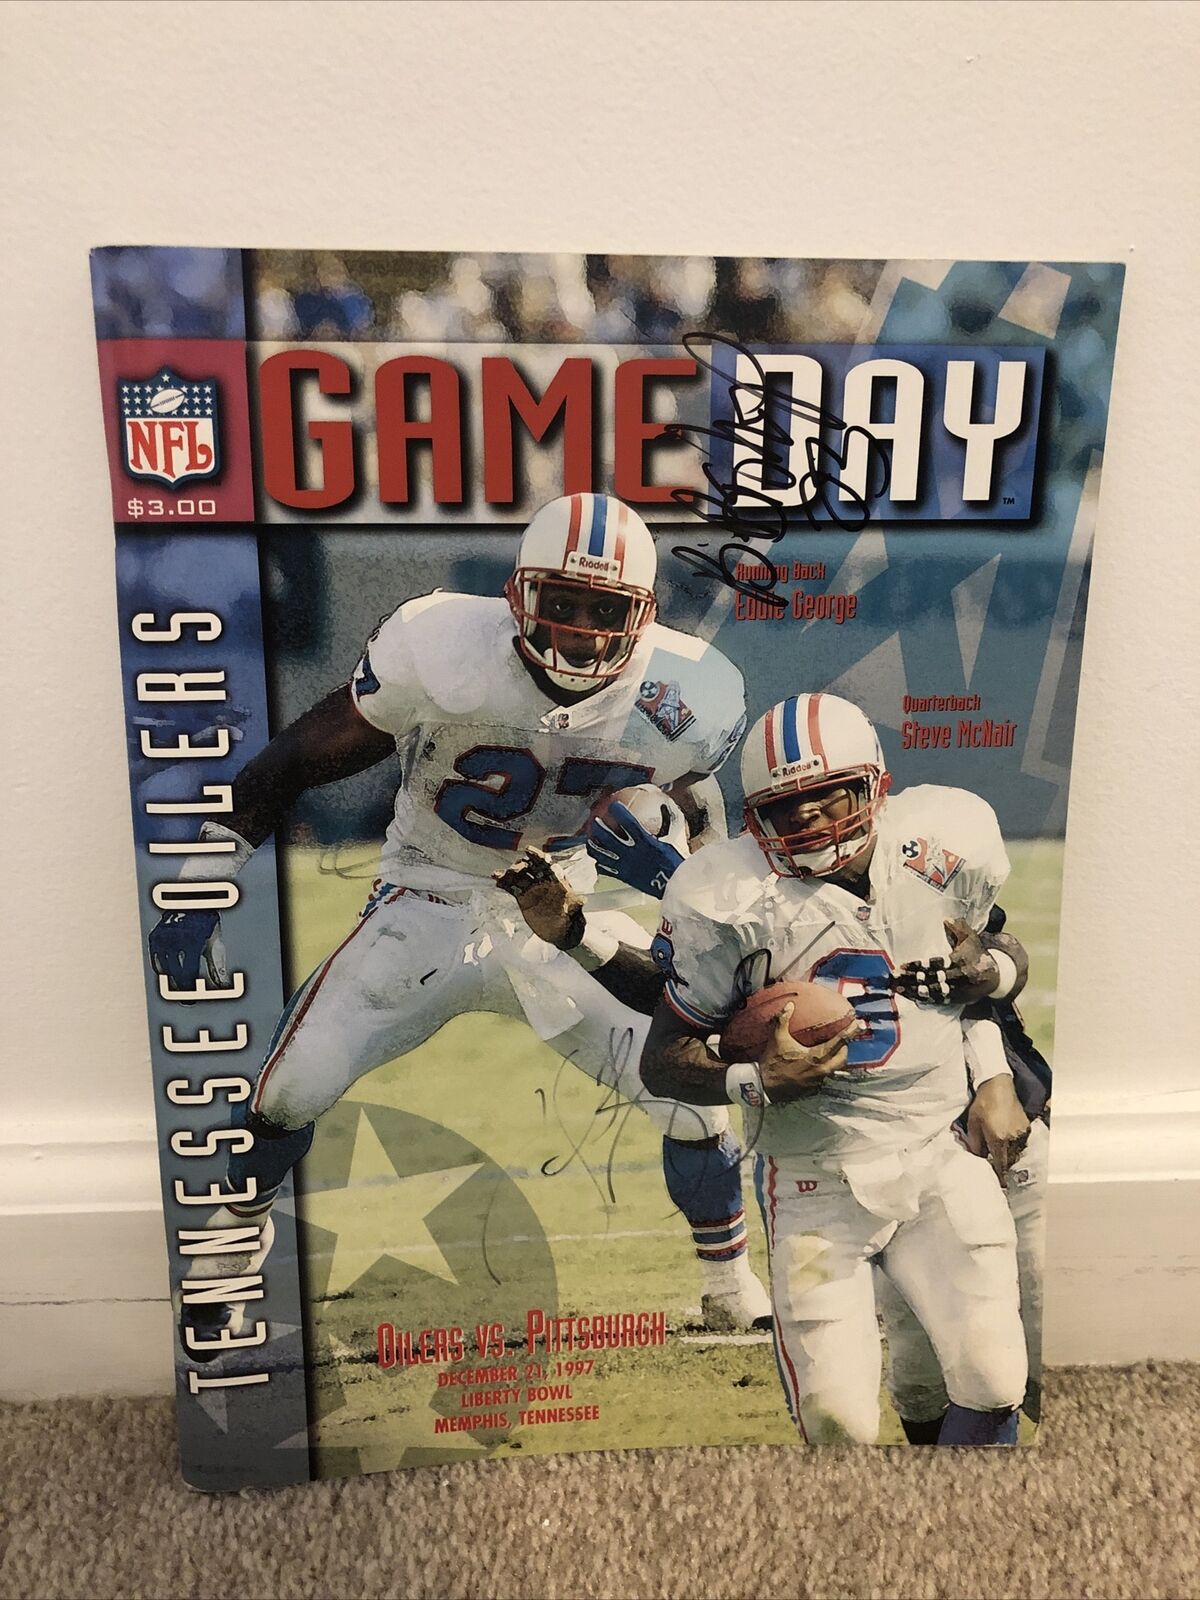 Steve Mcnair Titans Vs Steelers Signed Autograph Game Day Program Jerome Bettis